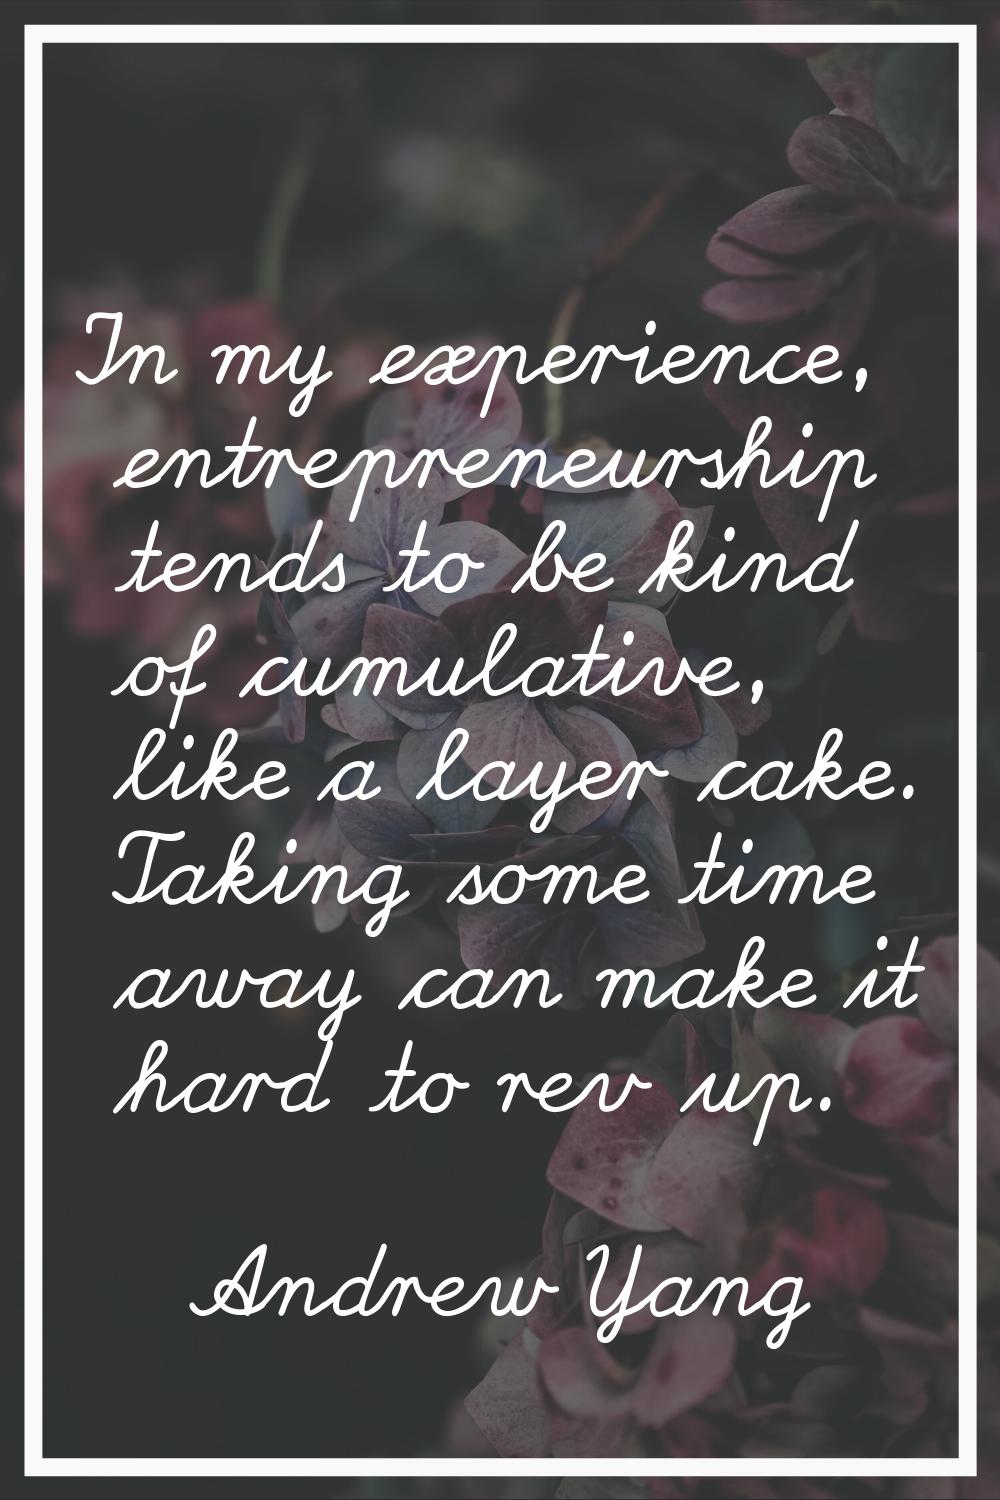 In my experience, entrepreneurship tends to be kind of cumulative, like a layer cake. Taking some t